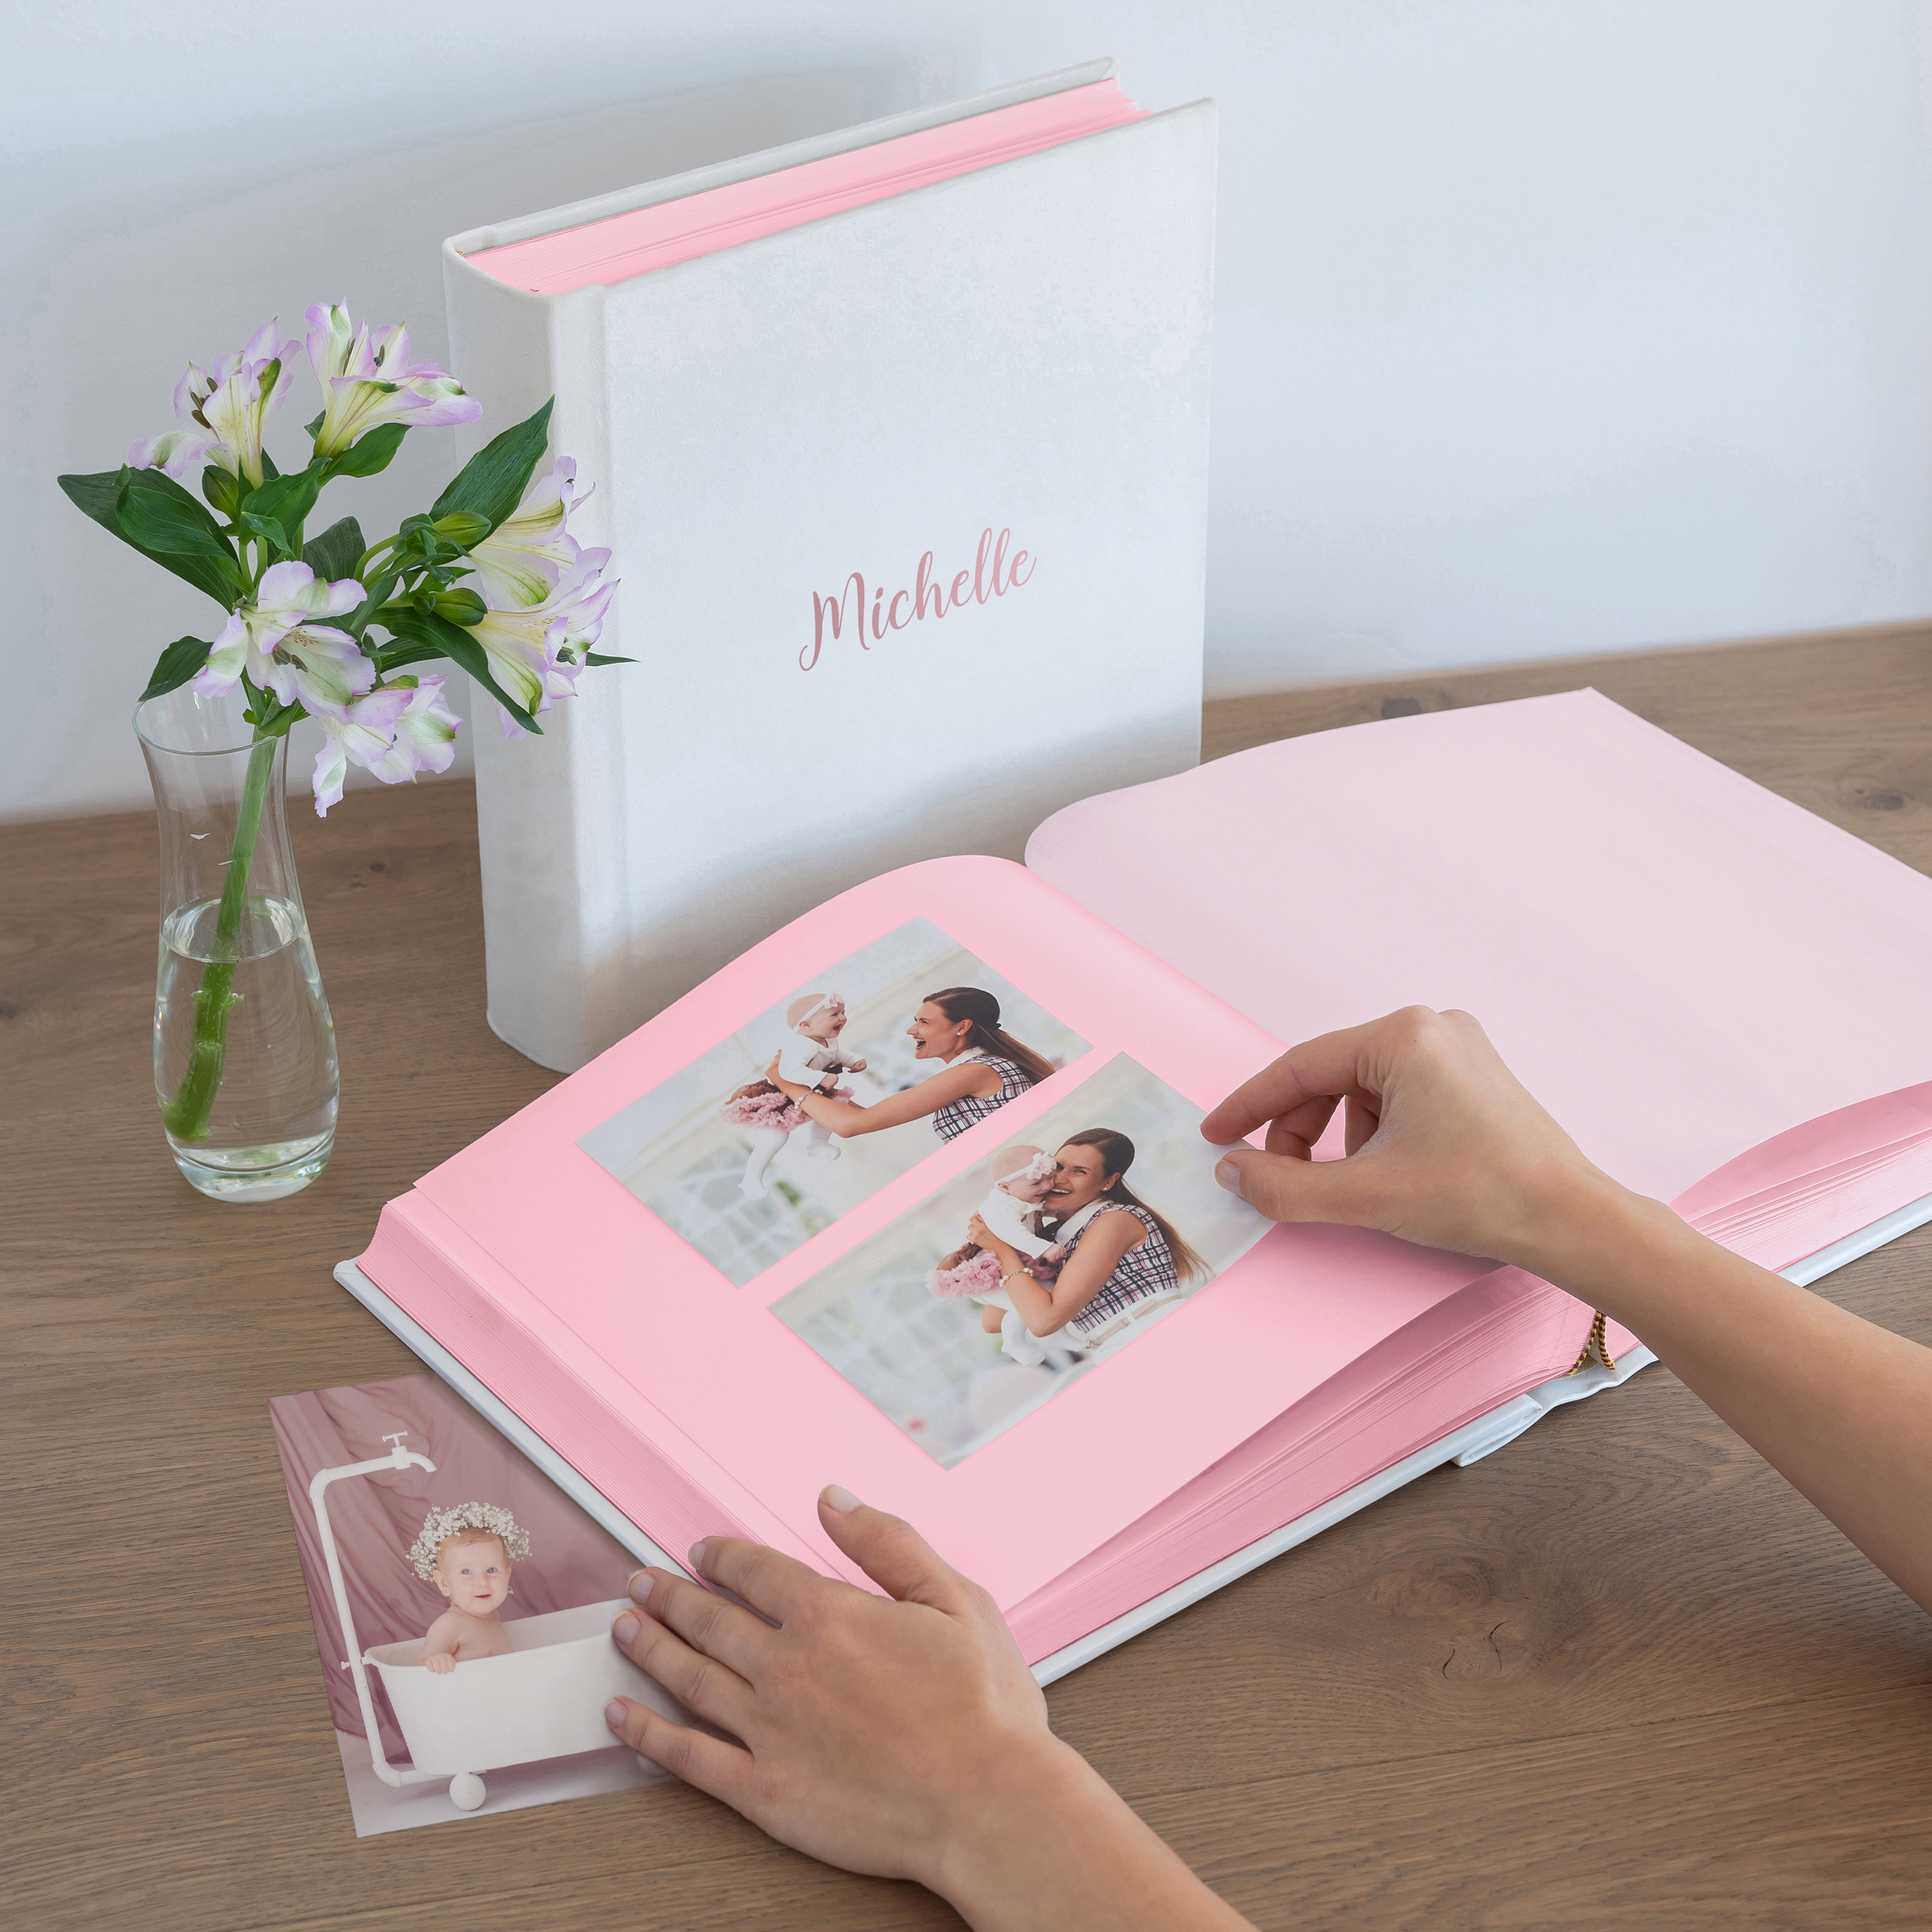 Baby-Pink SCRAPBOOK PHOTO BOX keepsake album by Pioneer® - Picture Frames,  Photo Albums, Personalized and Engraved Digital Photo Gifts - SendAFrame